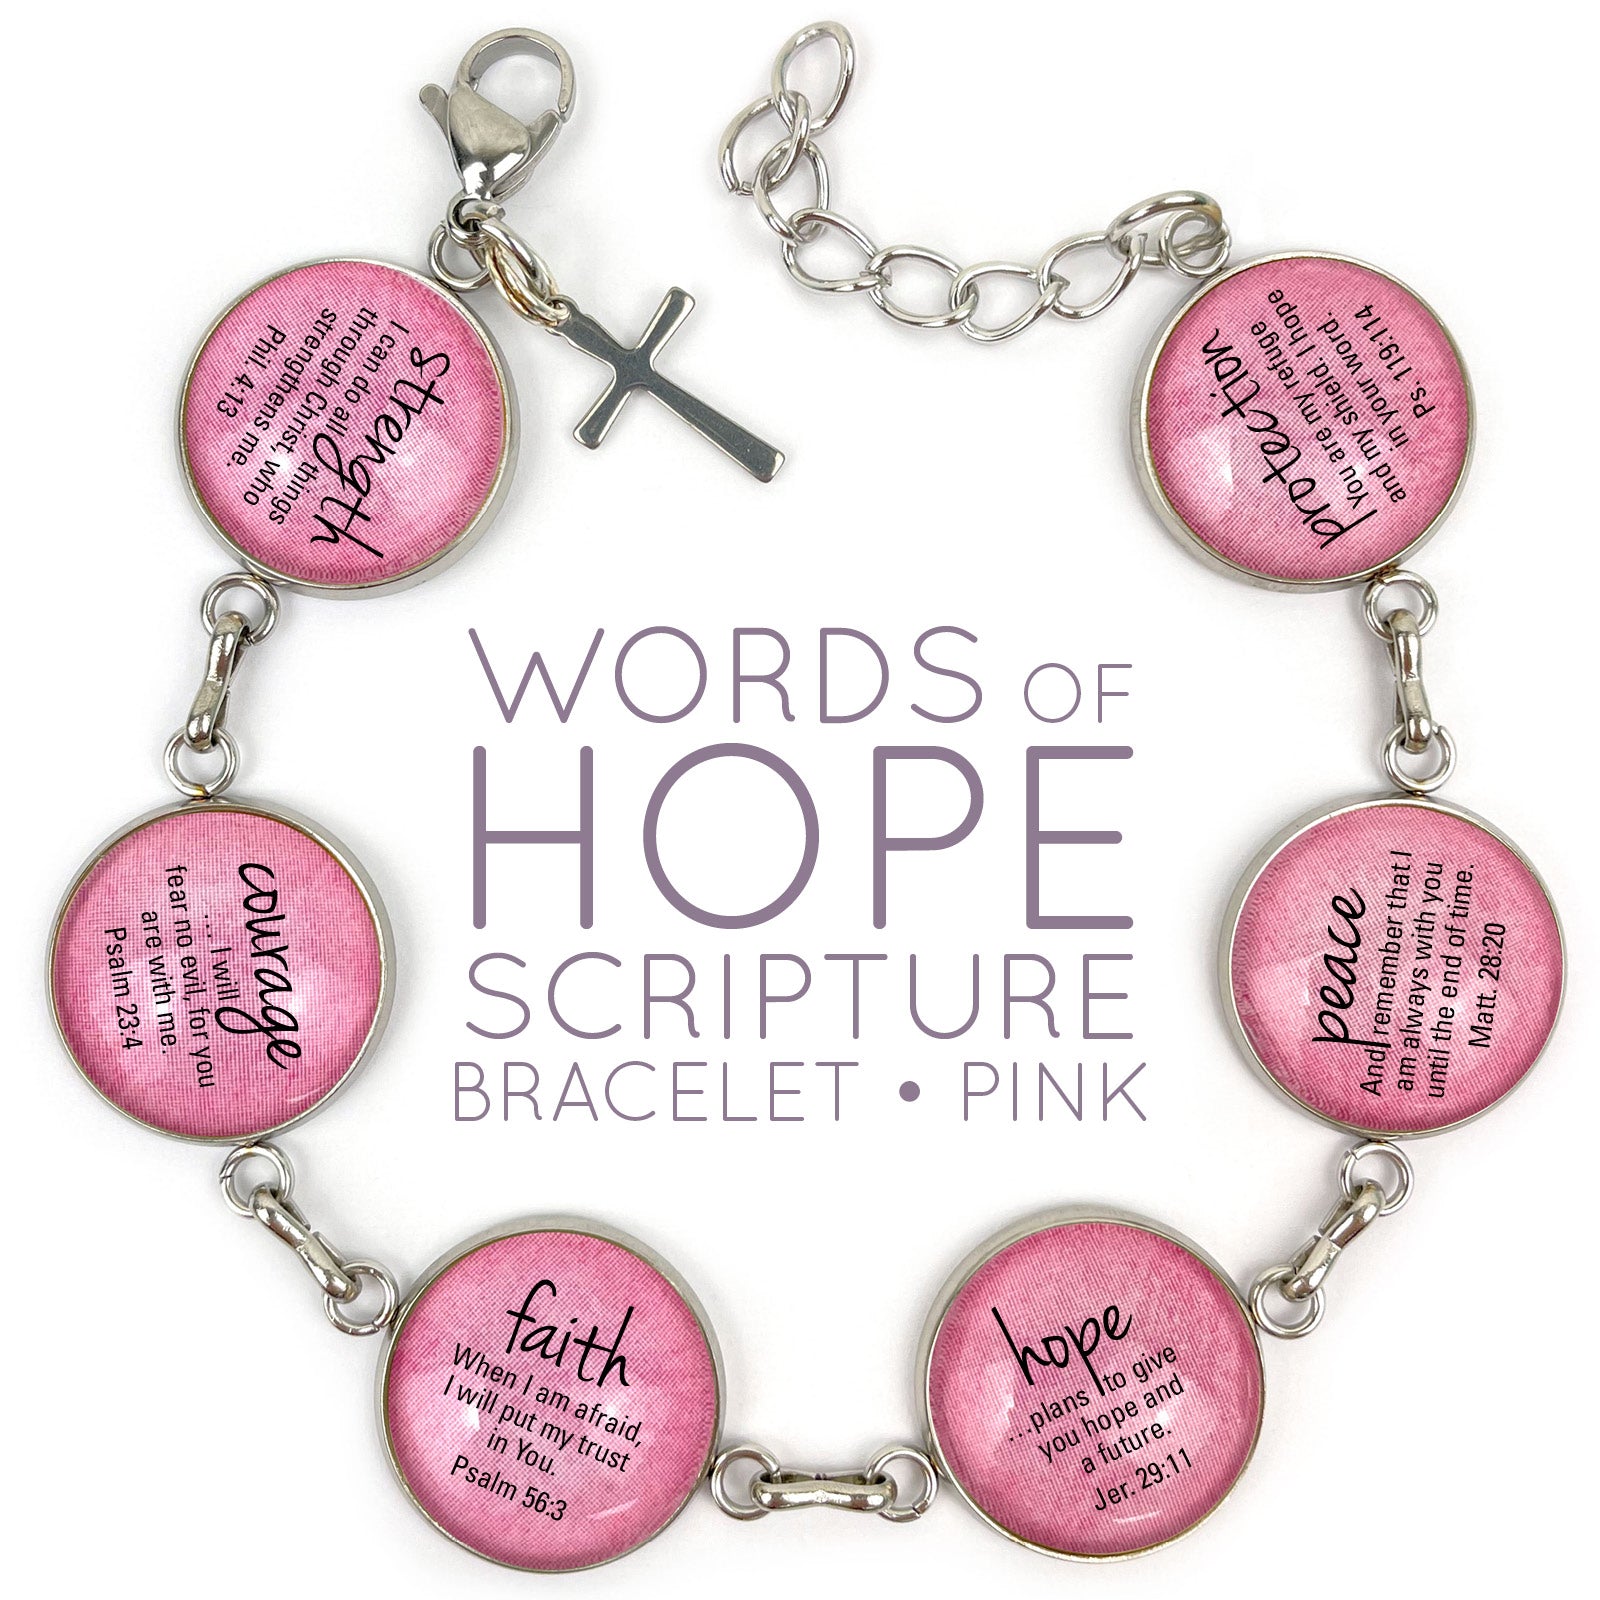 Scripture Charm Bracelet - Words of Hope & Encouragement, Strength, Courage, Faith, Hope - Handcrafted with Glass Charms and Dangling Charm Options - Bracelets - Bijou Her -  -  - 